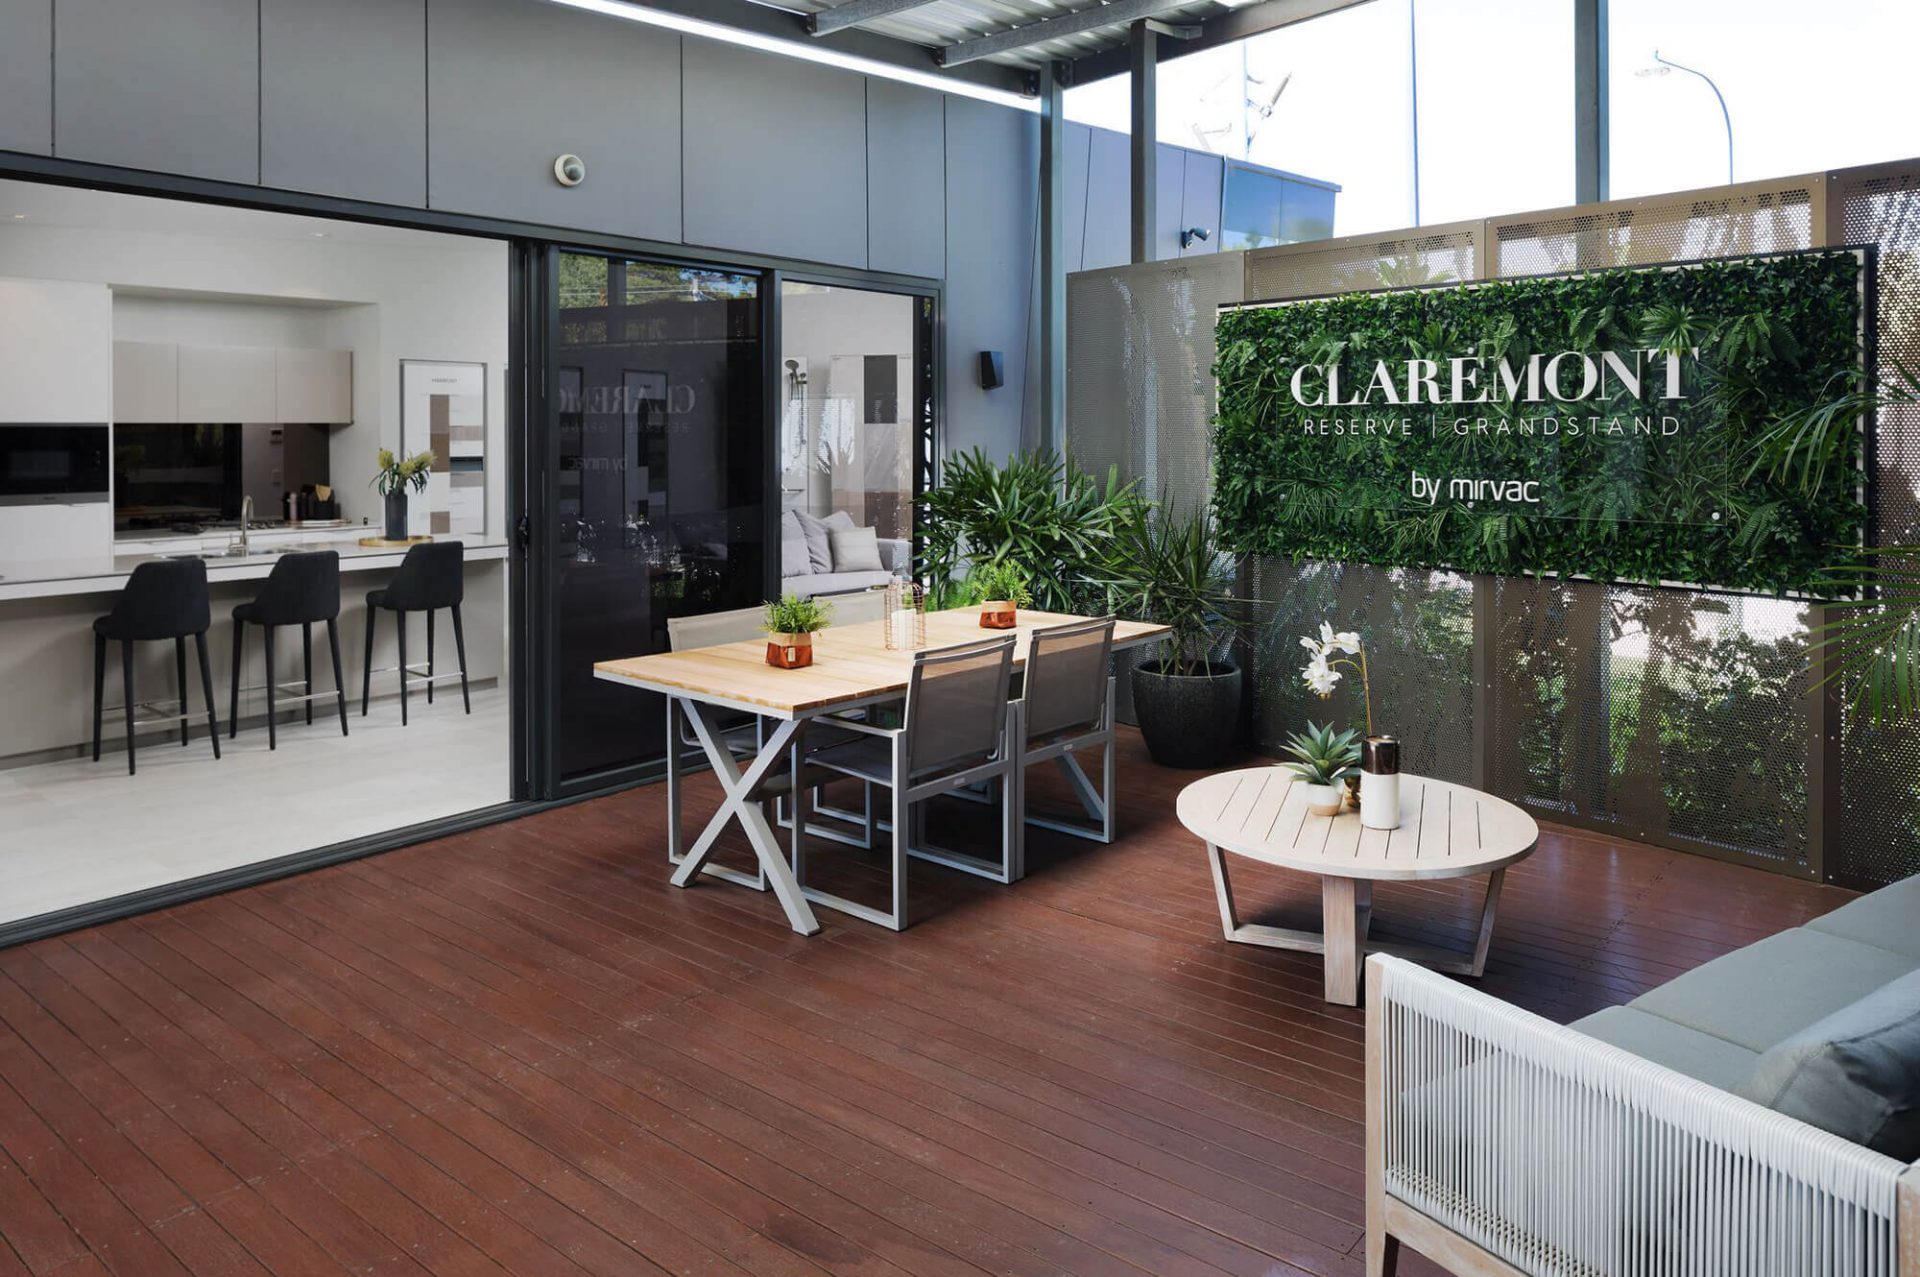 Claremont Sales Office for Mirvac